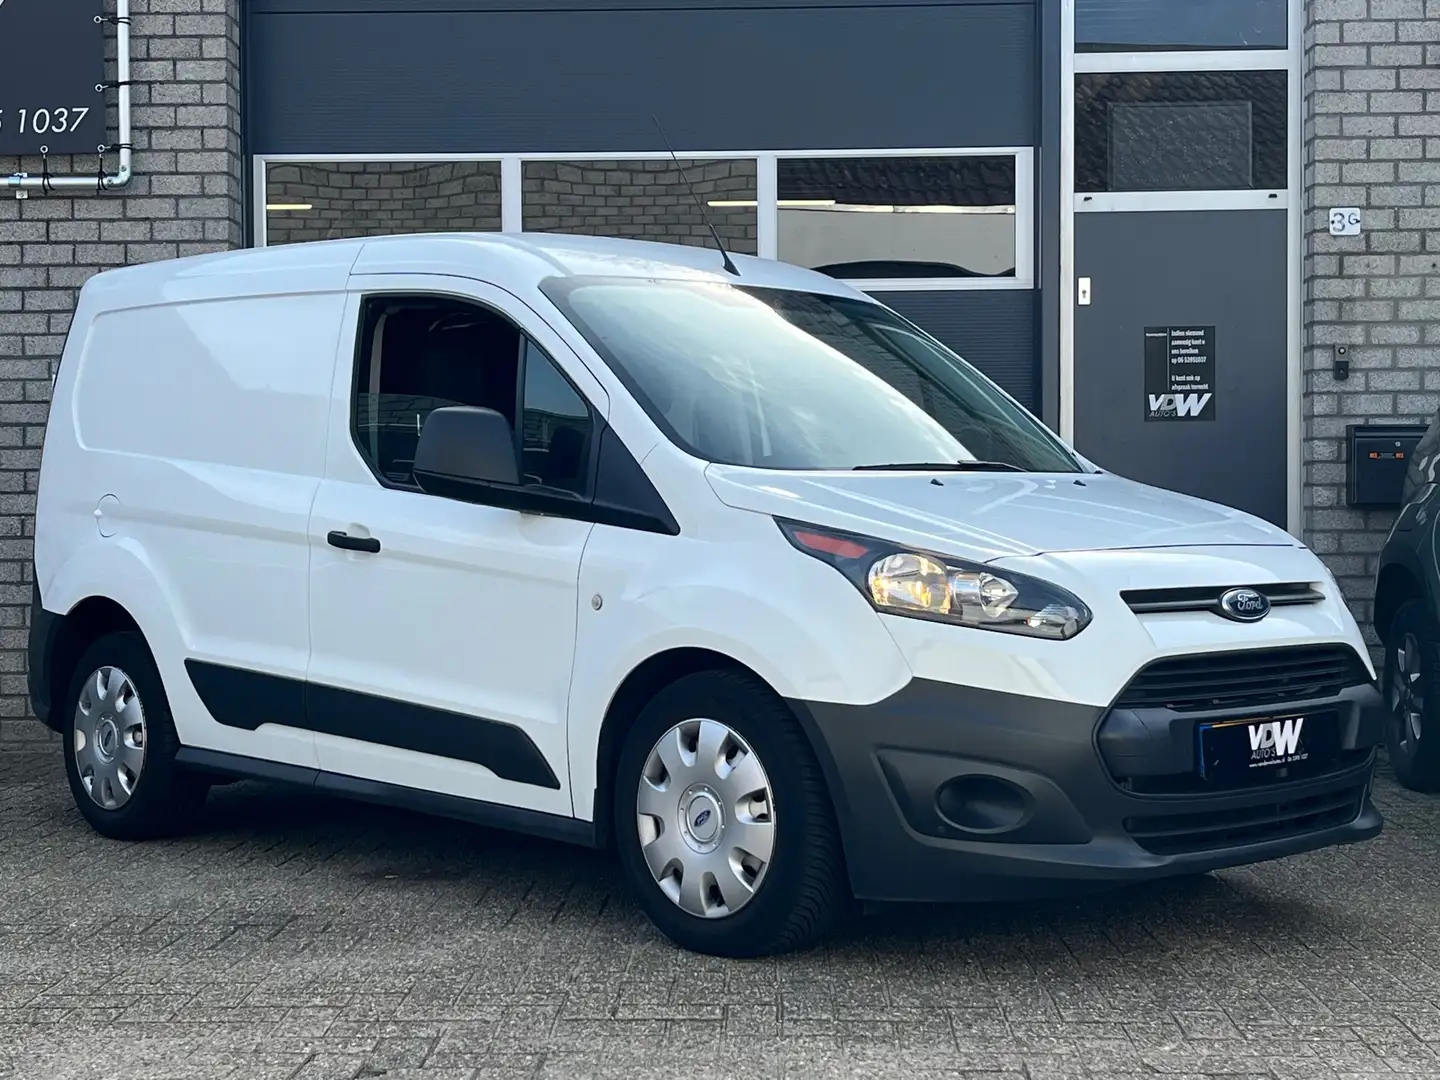 Ford Transit Connect 1.5 TDCI L1 euro 6 airco 49288 KM N.A.P. eerste ei - 2